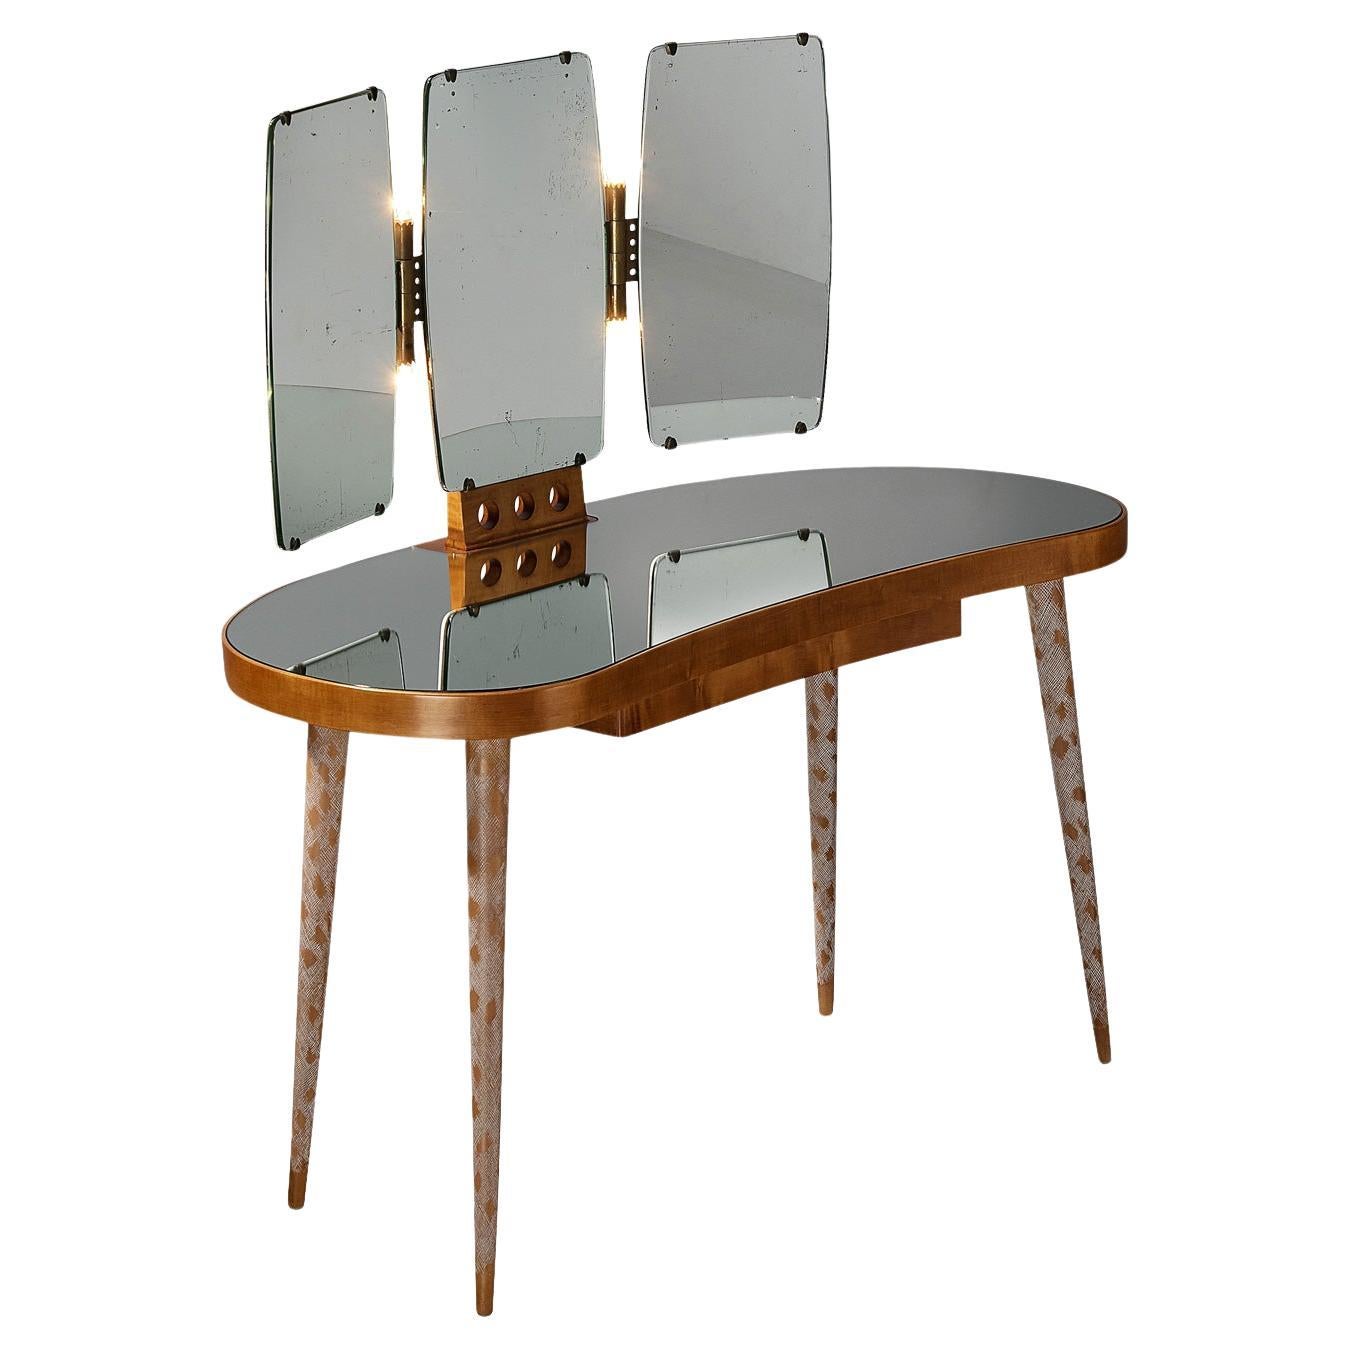 Rare Osvaldo Borsani Vanity Table in Maple with Mirrors and Built-in Lights 